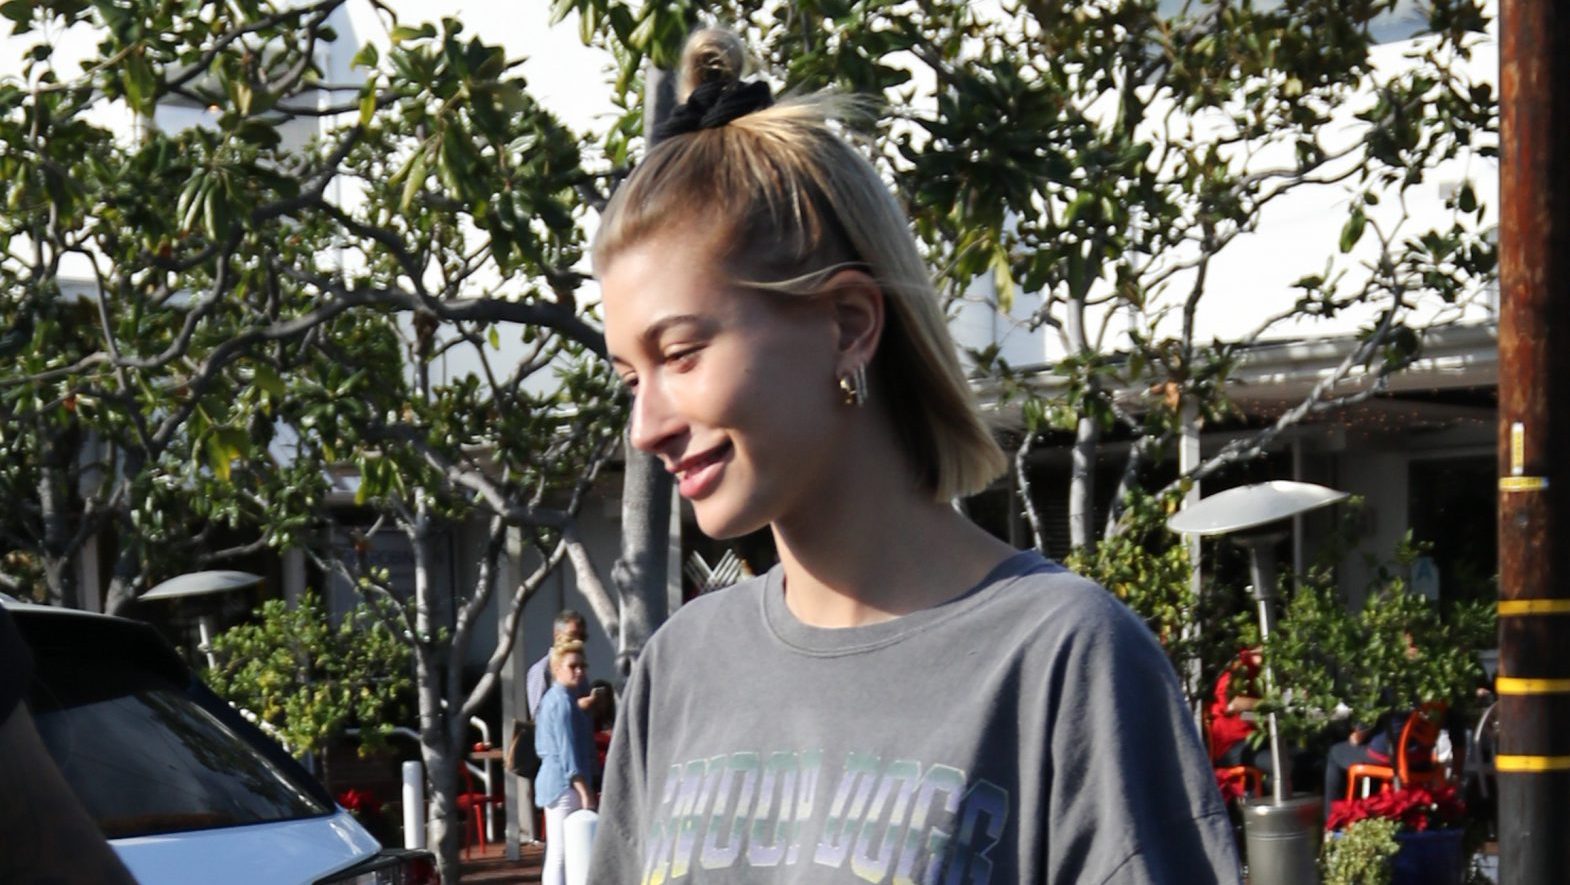 Hailey Baldwin's Cozy Outfit Is for Netflix and Chillin